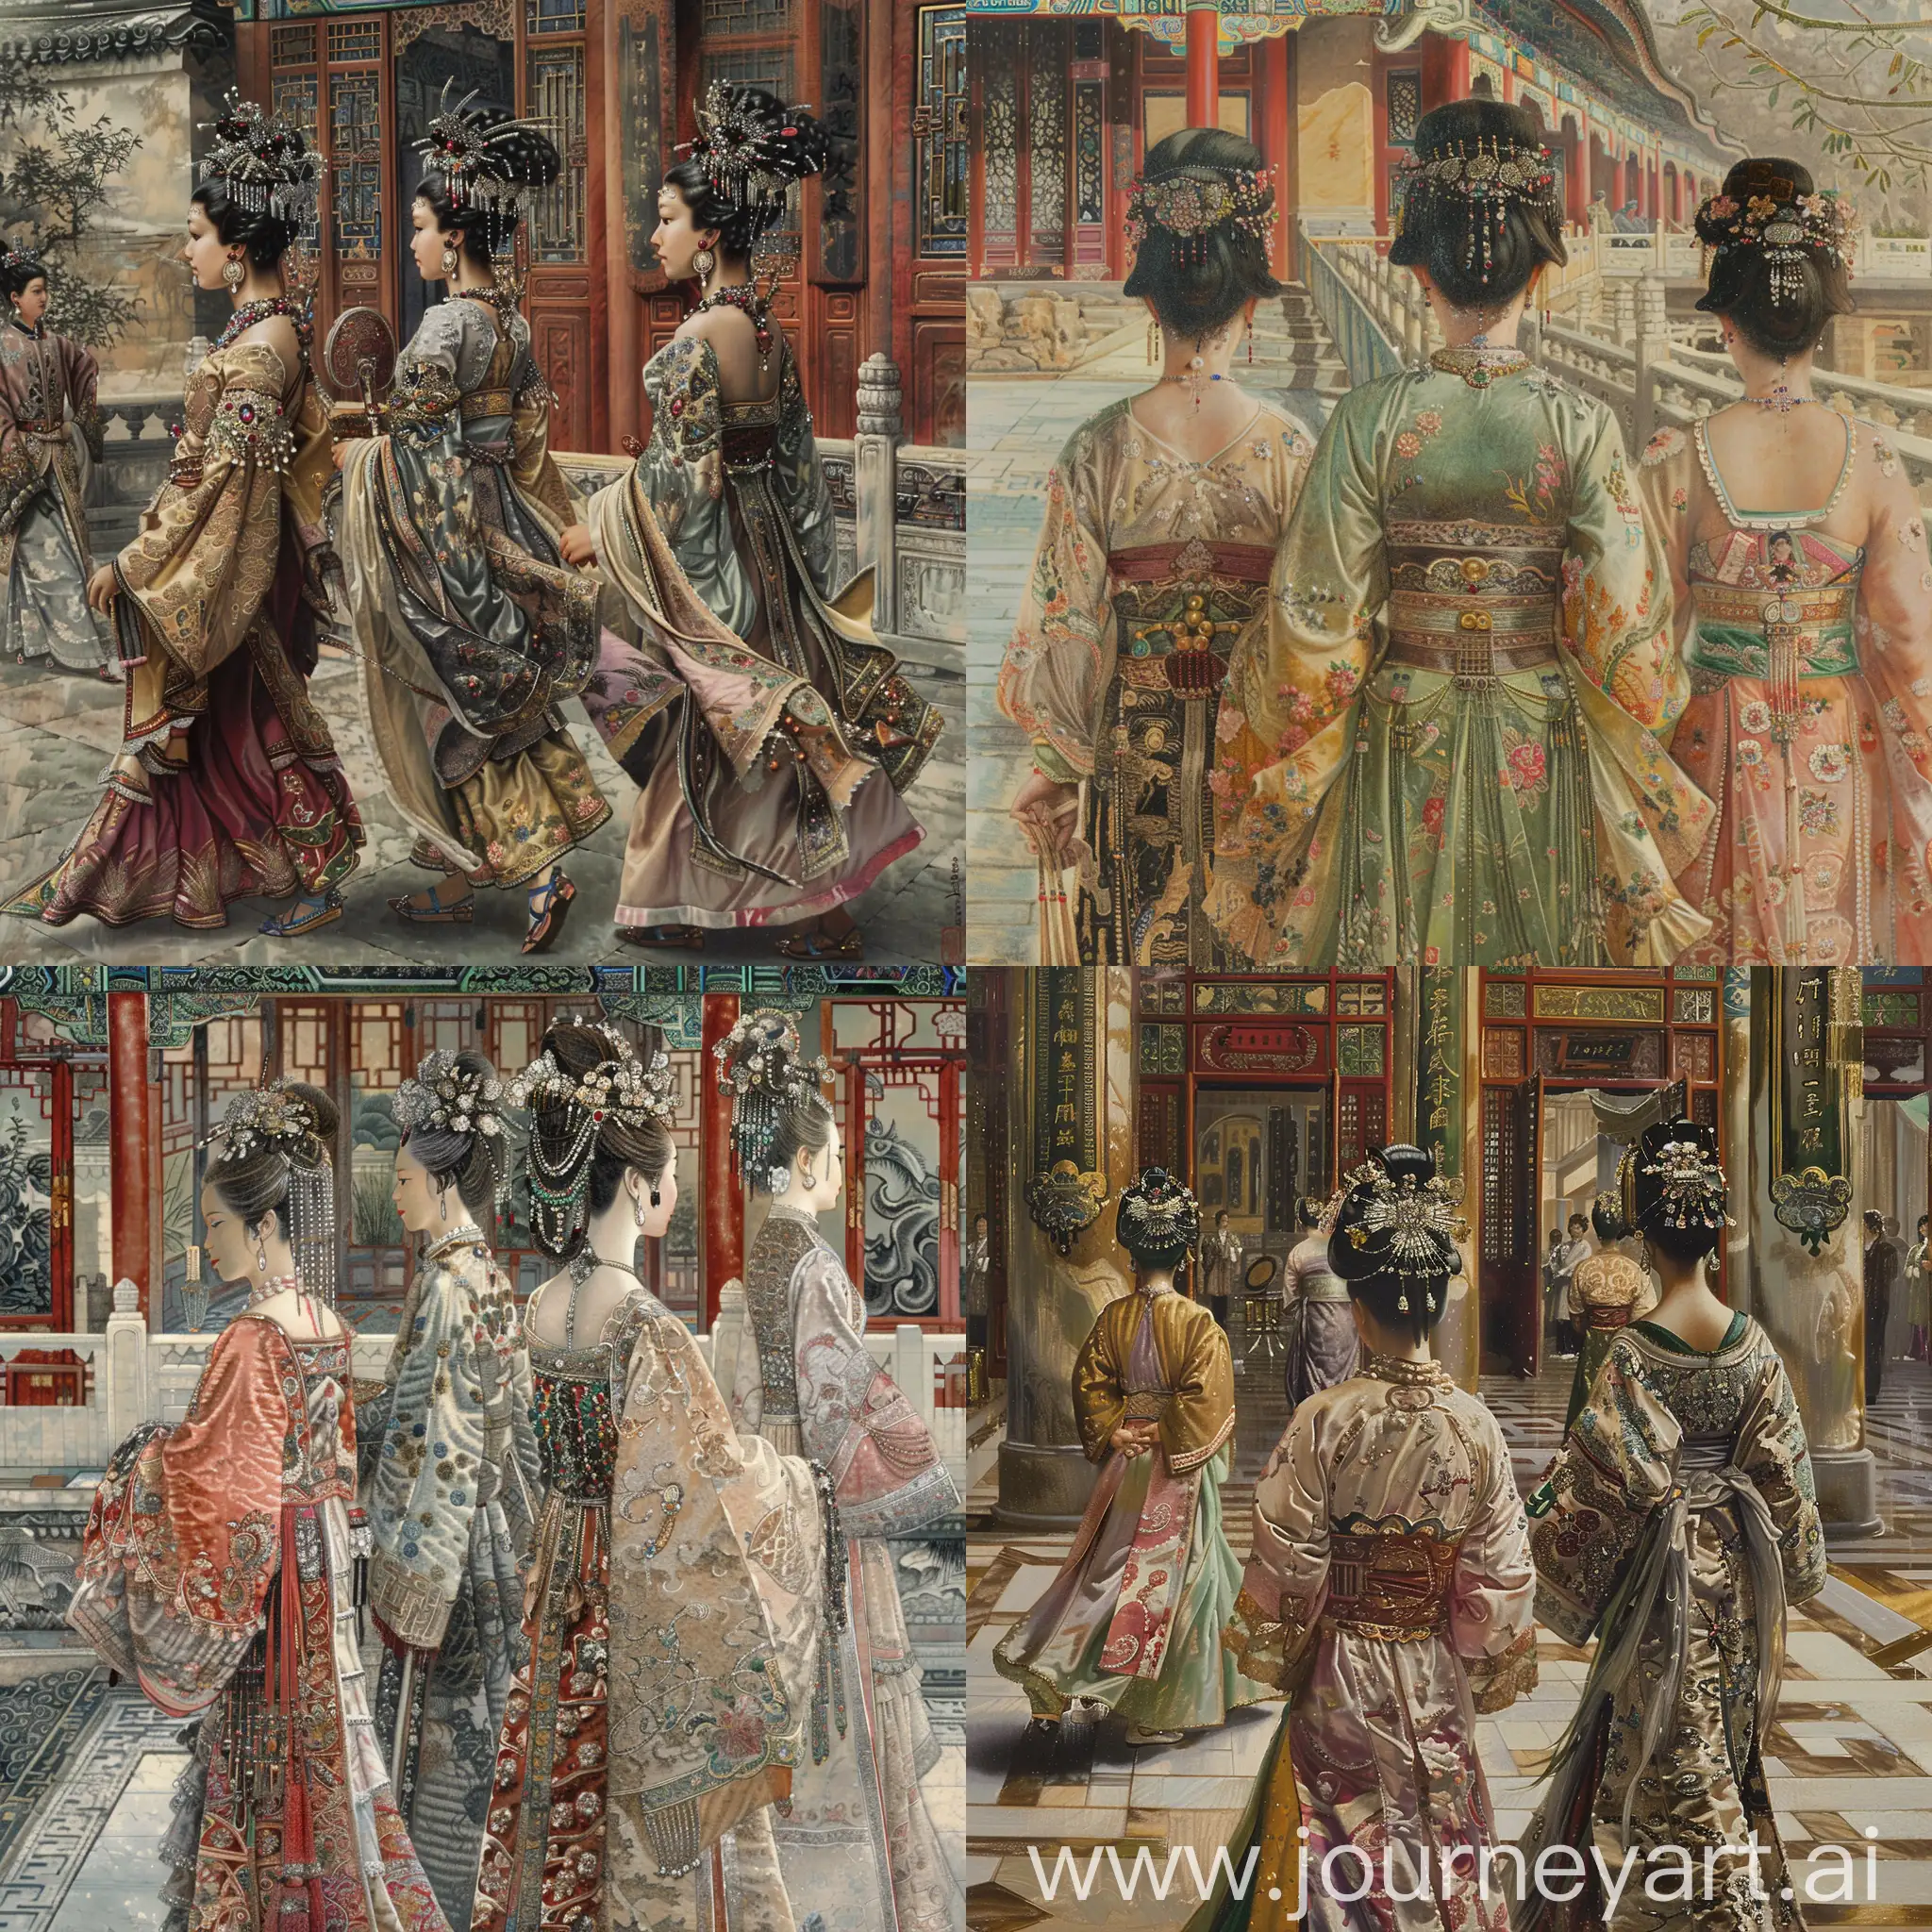 Luxurious-Empress-Dowager-Cixi-Assisted-by-Maids-in-Magnificent-Painting